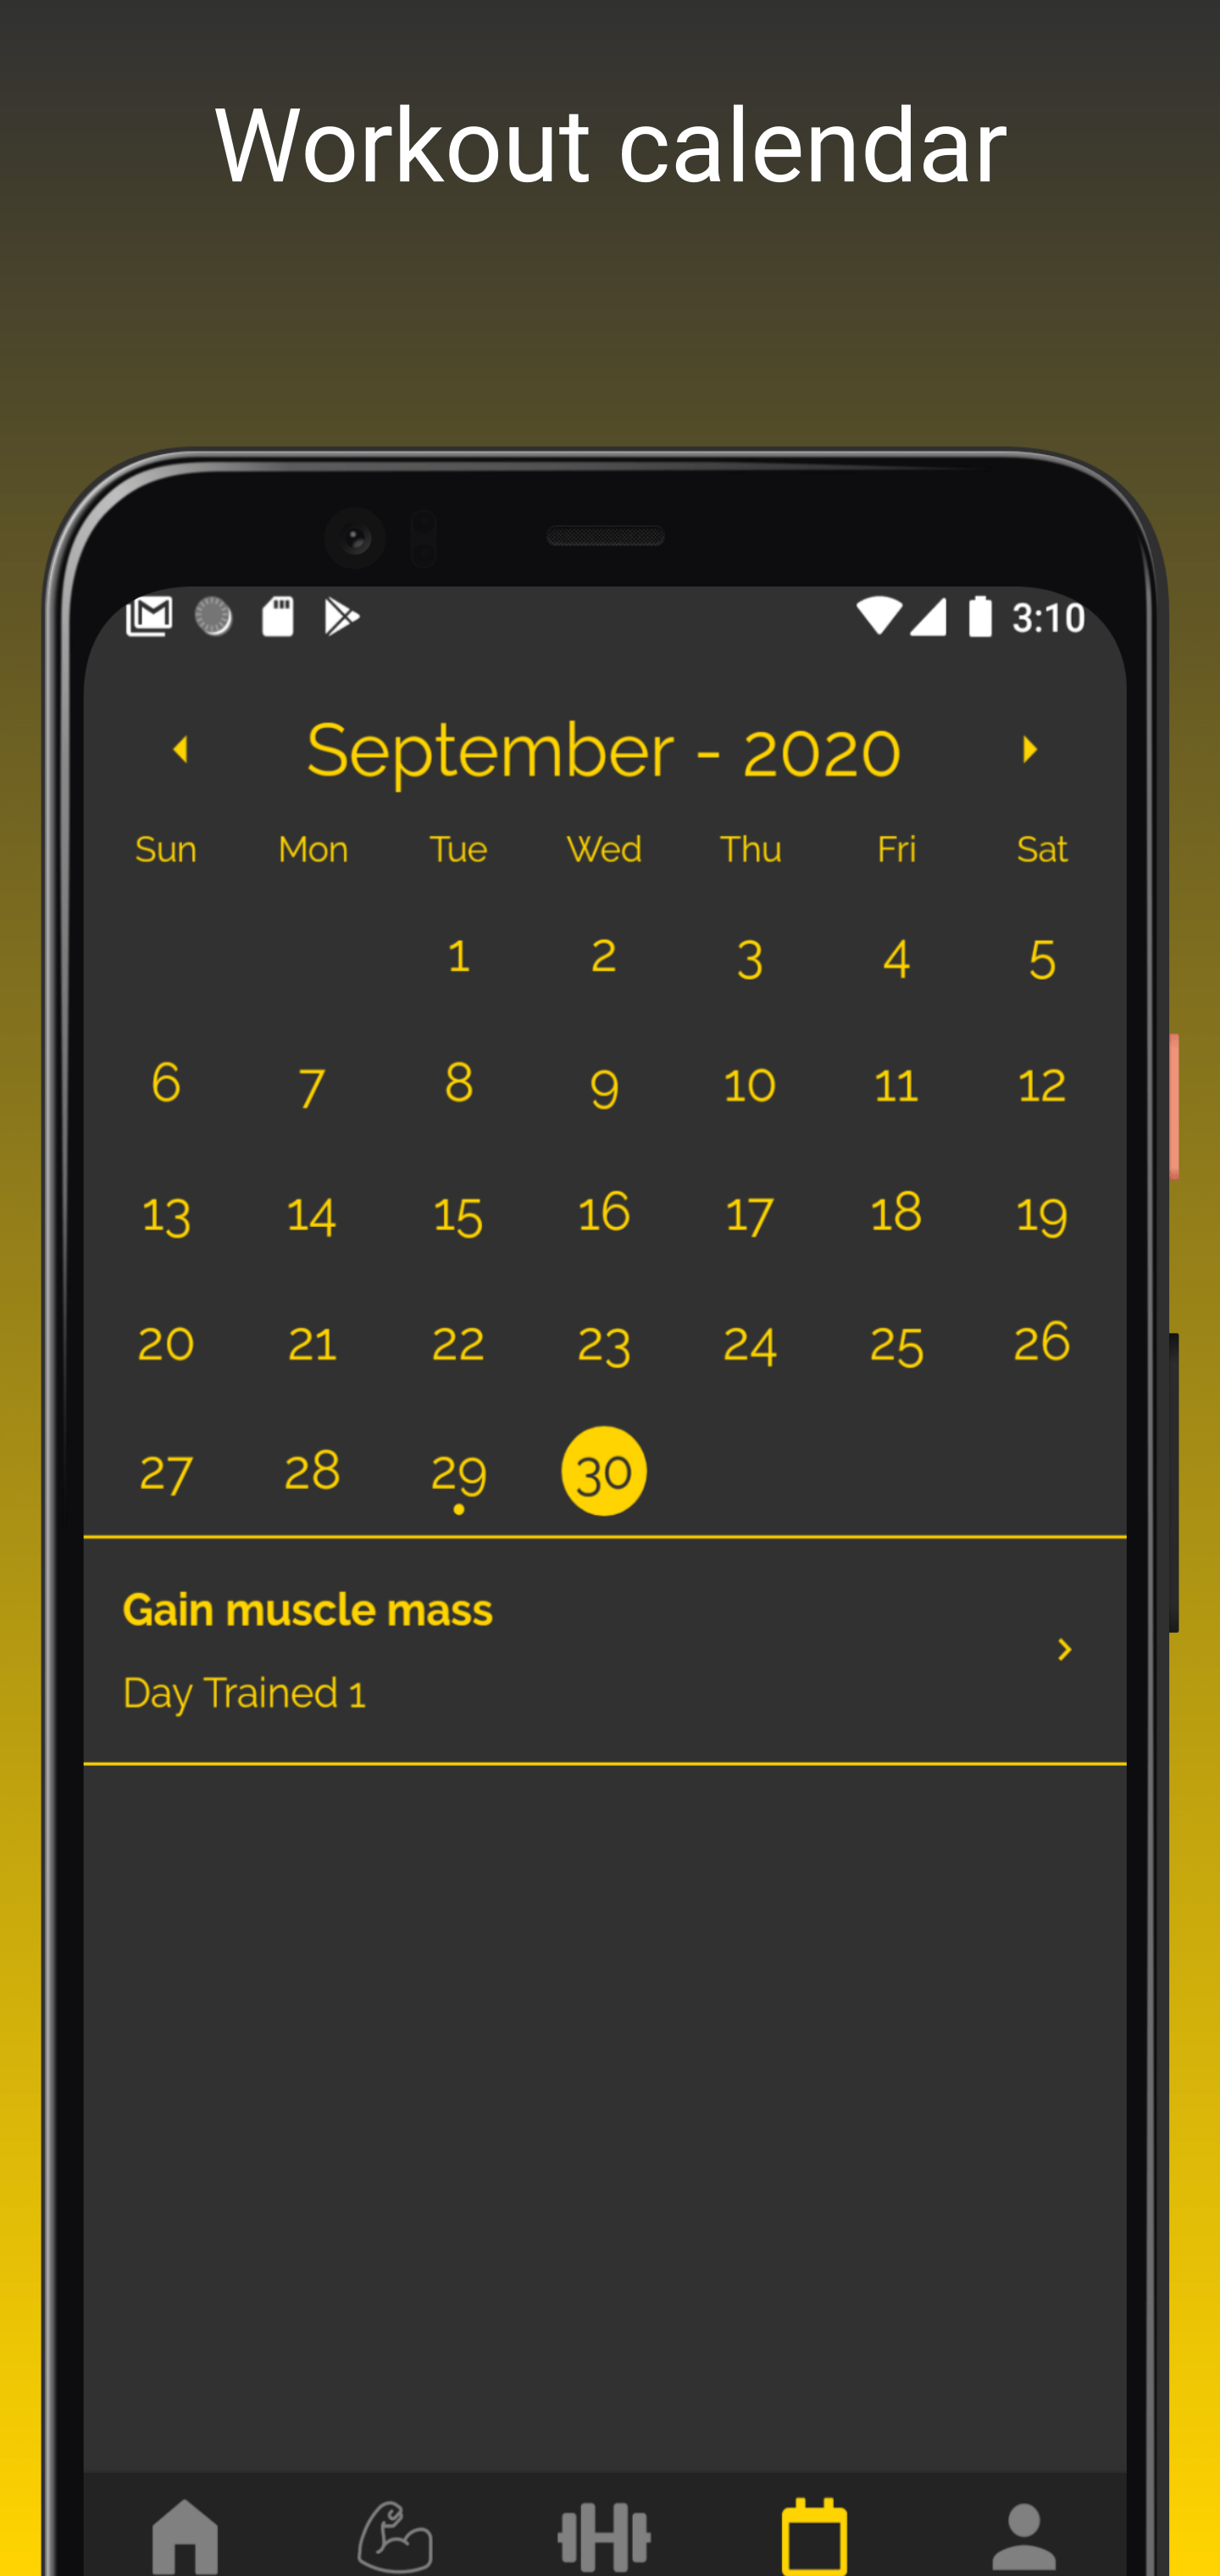 X-ercise - workout plans, gym tracker